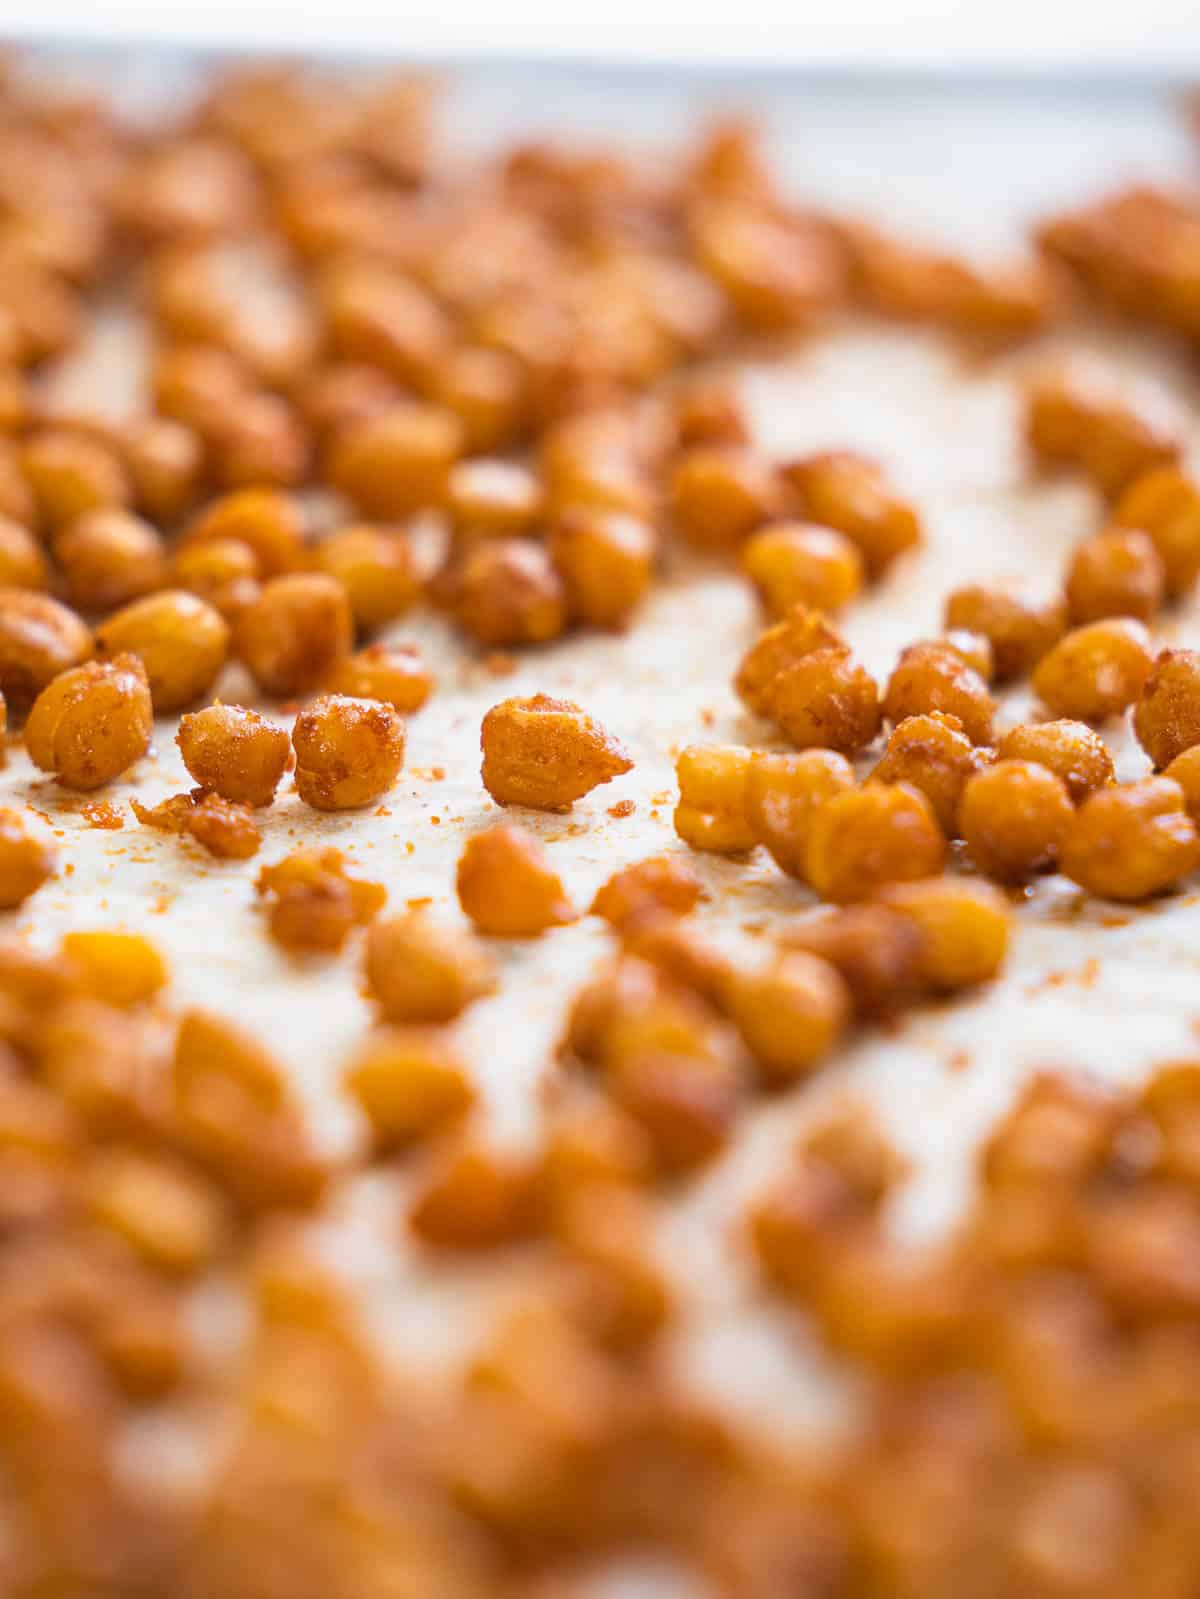 remove the roasted chickpeas from the oven.